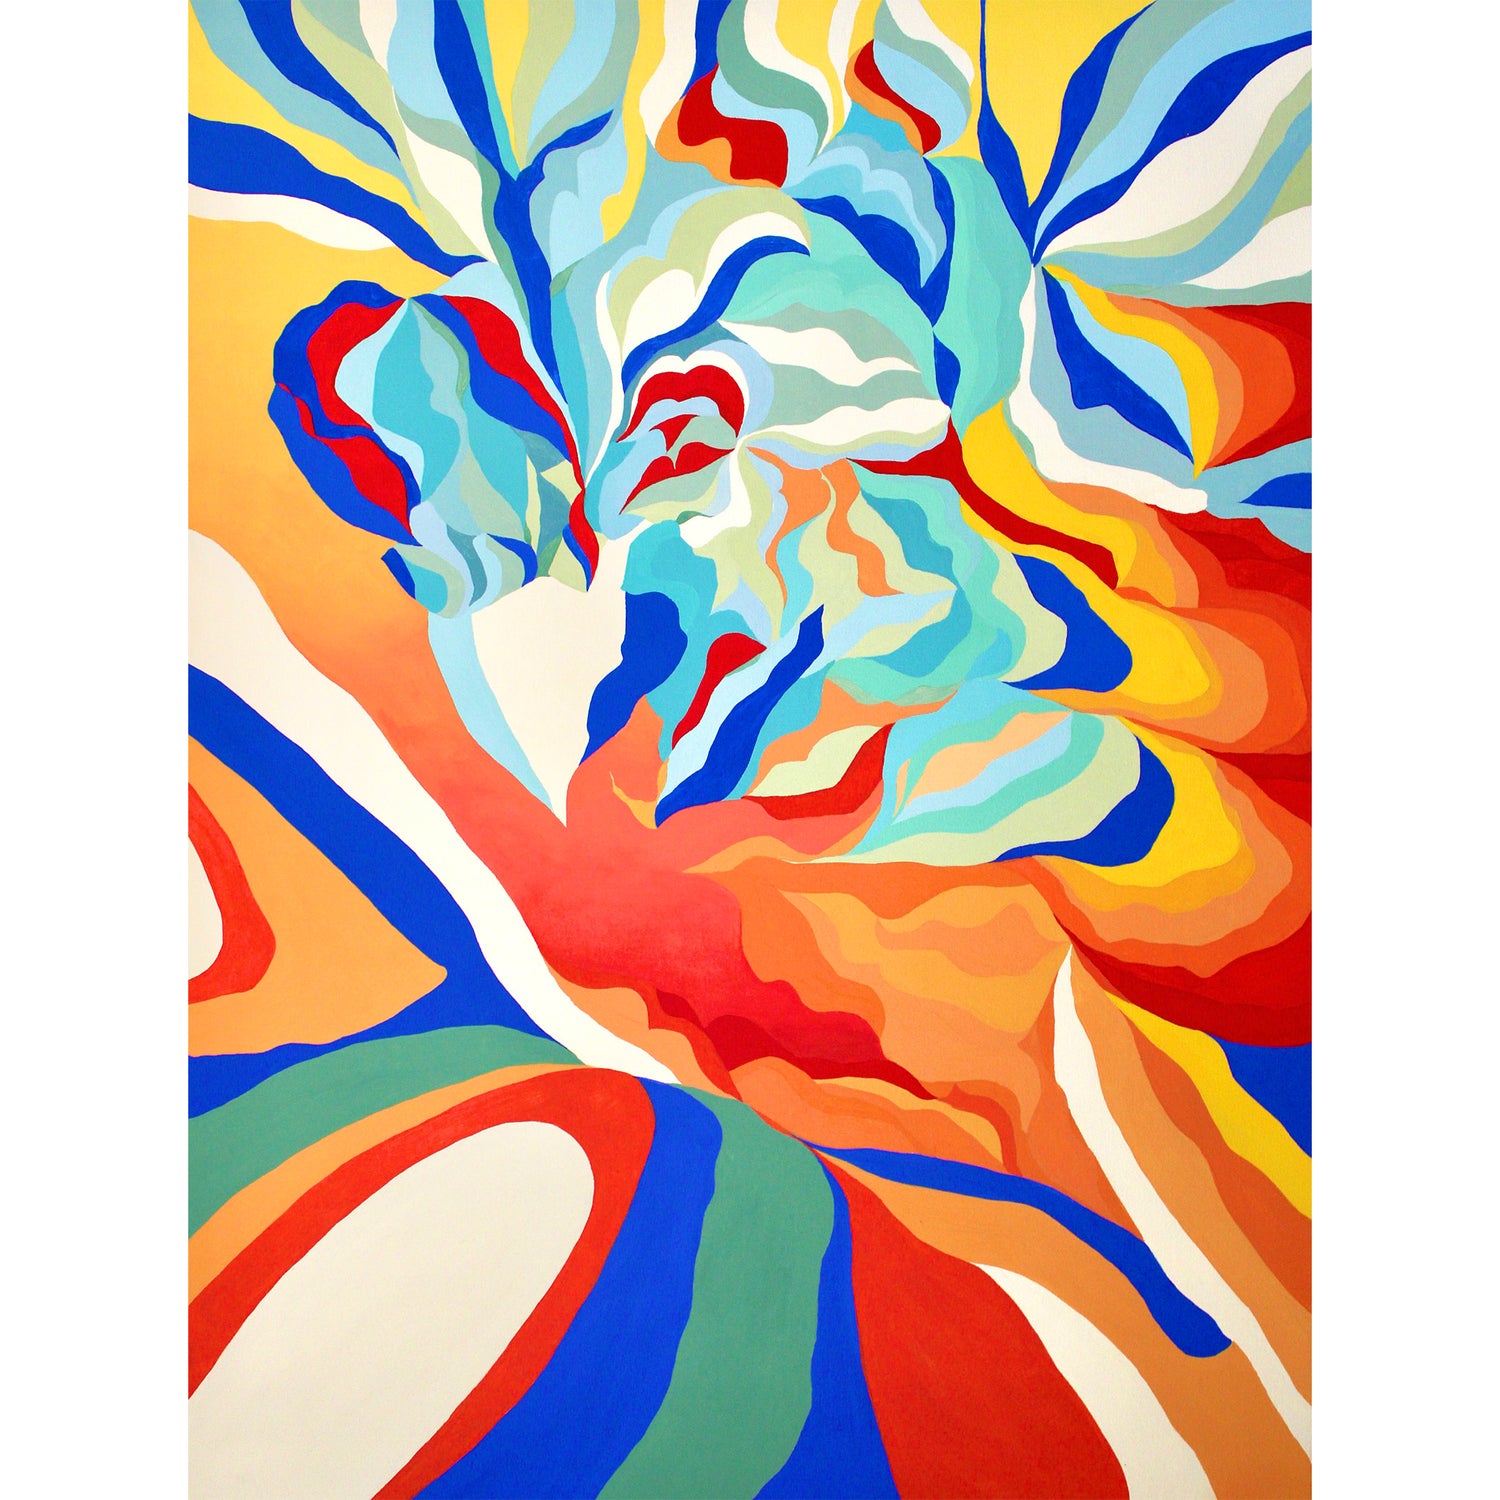 An original, large, colorful abstract phoenix symbolizing rebirth, beginning of a new era and resilience made by Nevenka Morozin.